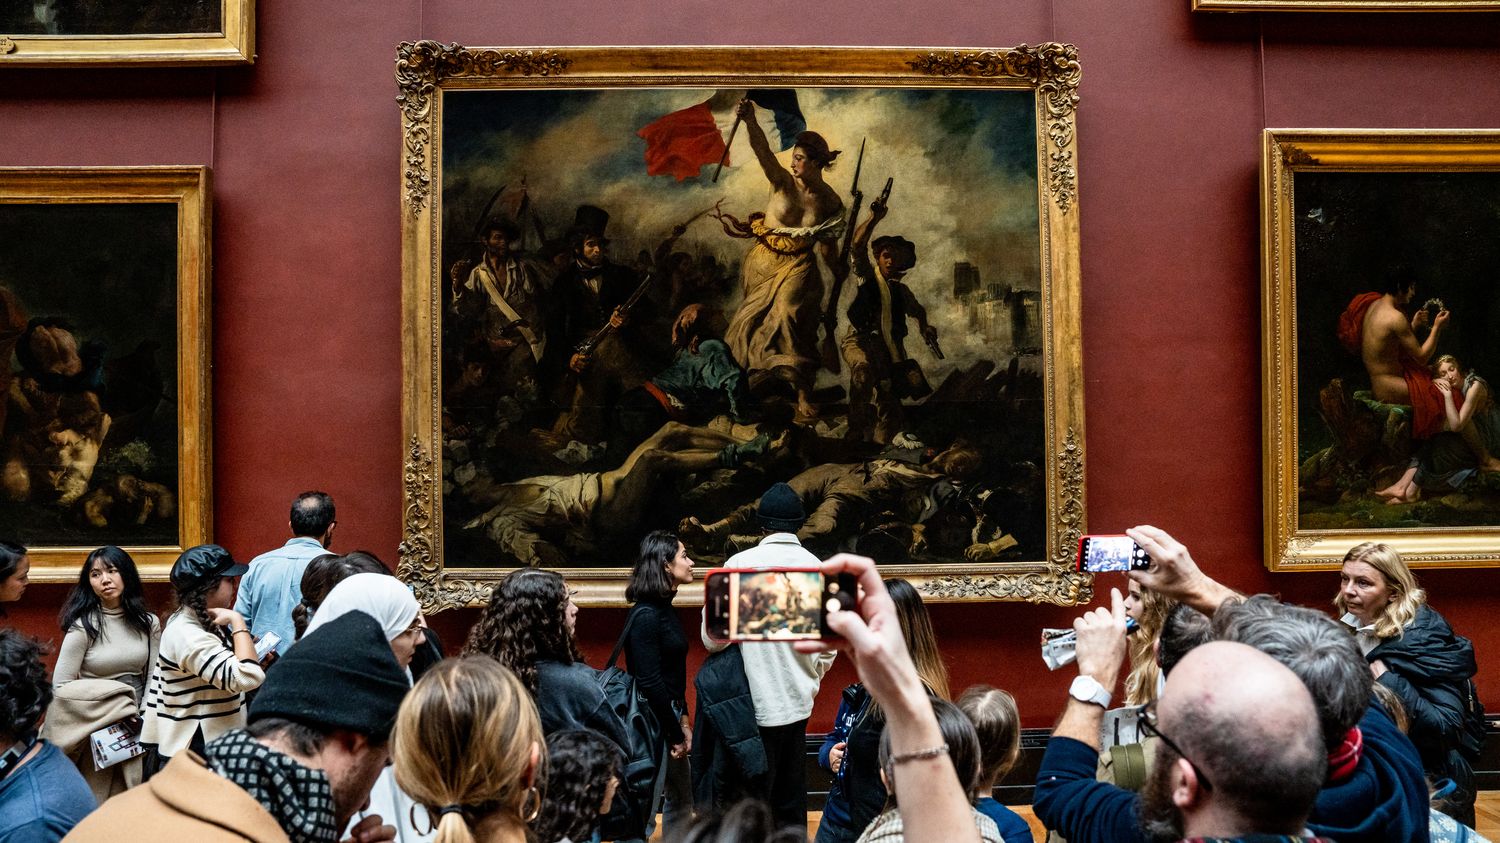 "We rediscovered the momentum of freedom": Delacroix's famous painting "Liberty leads the people" hangs in the Louvre after its restoration